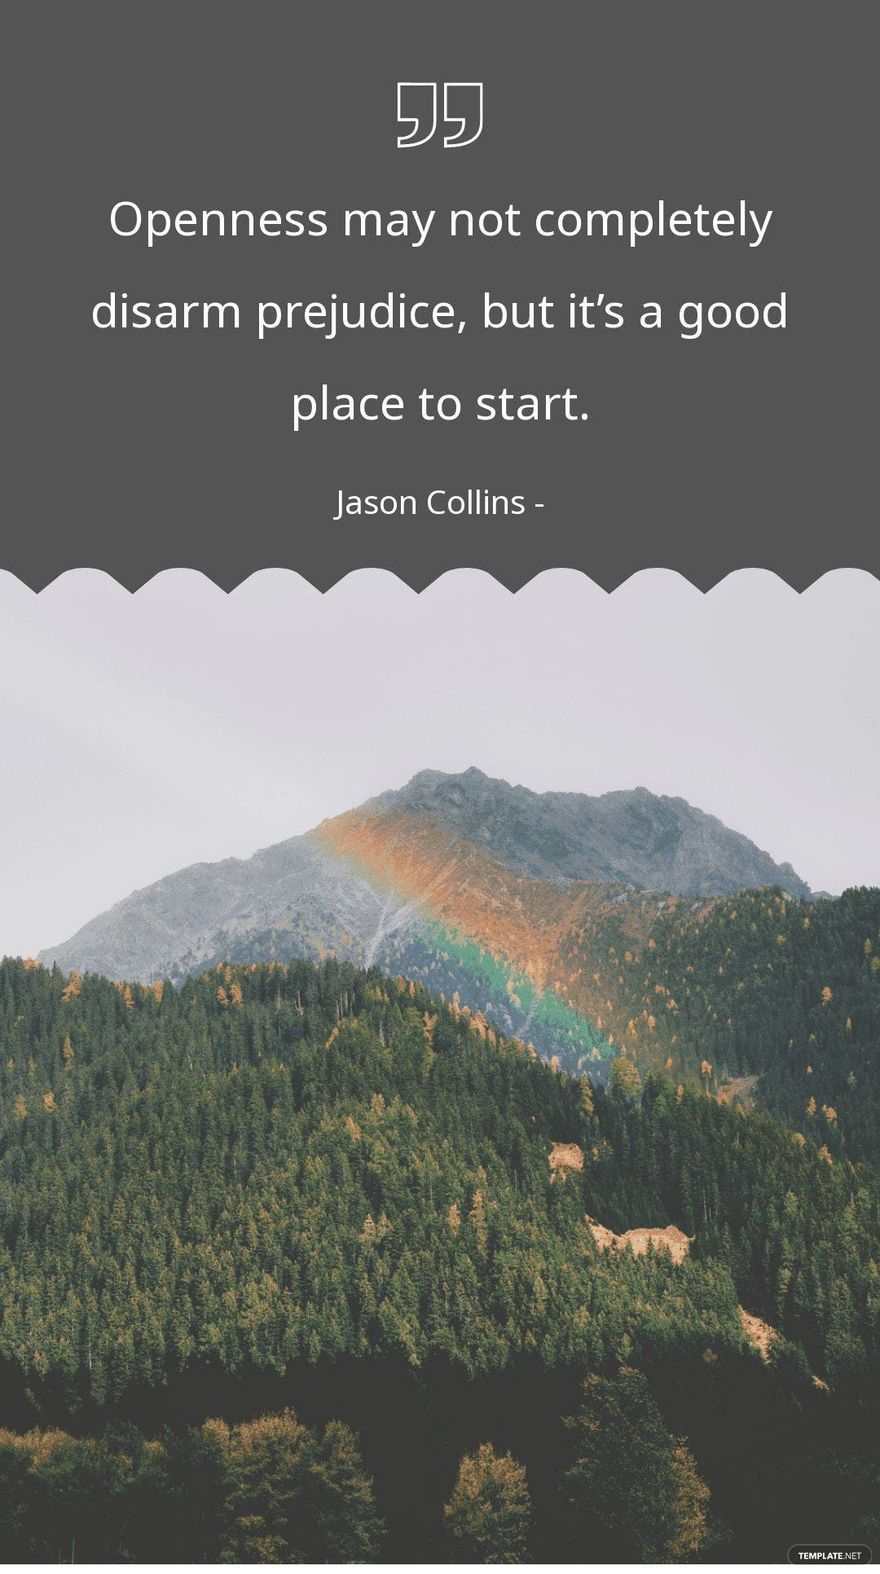 Jason Collins - Openness may not completely disarm prejudice, but it’s a good place to start. in JPG